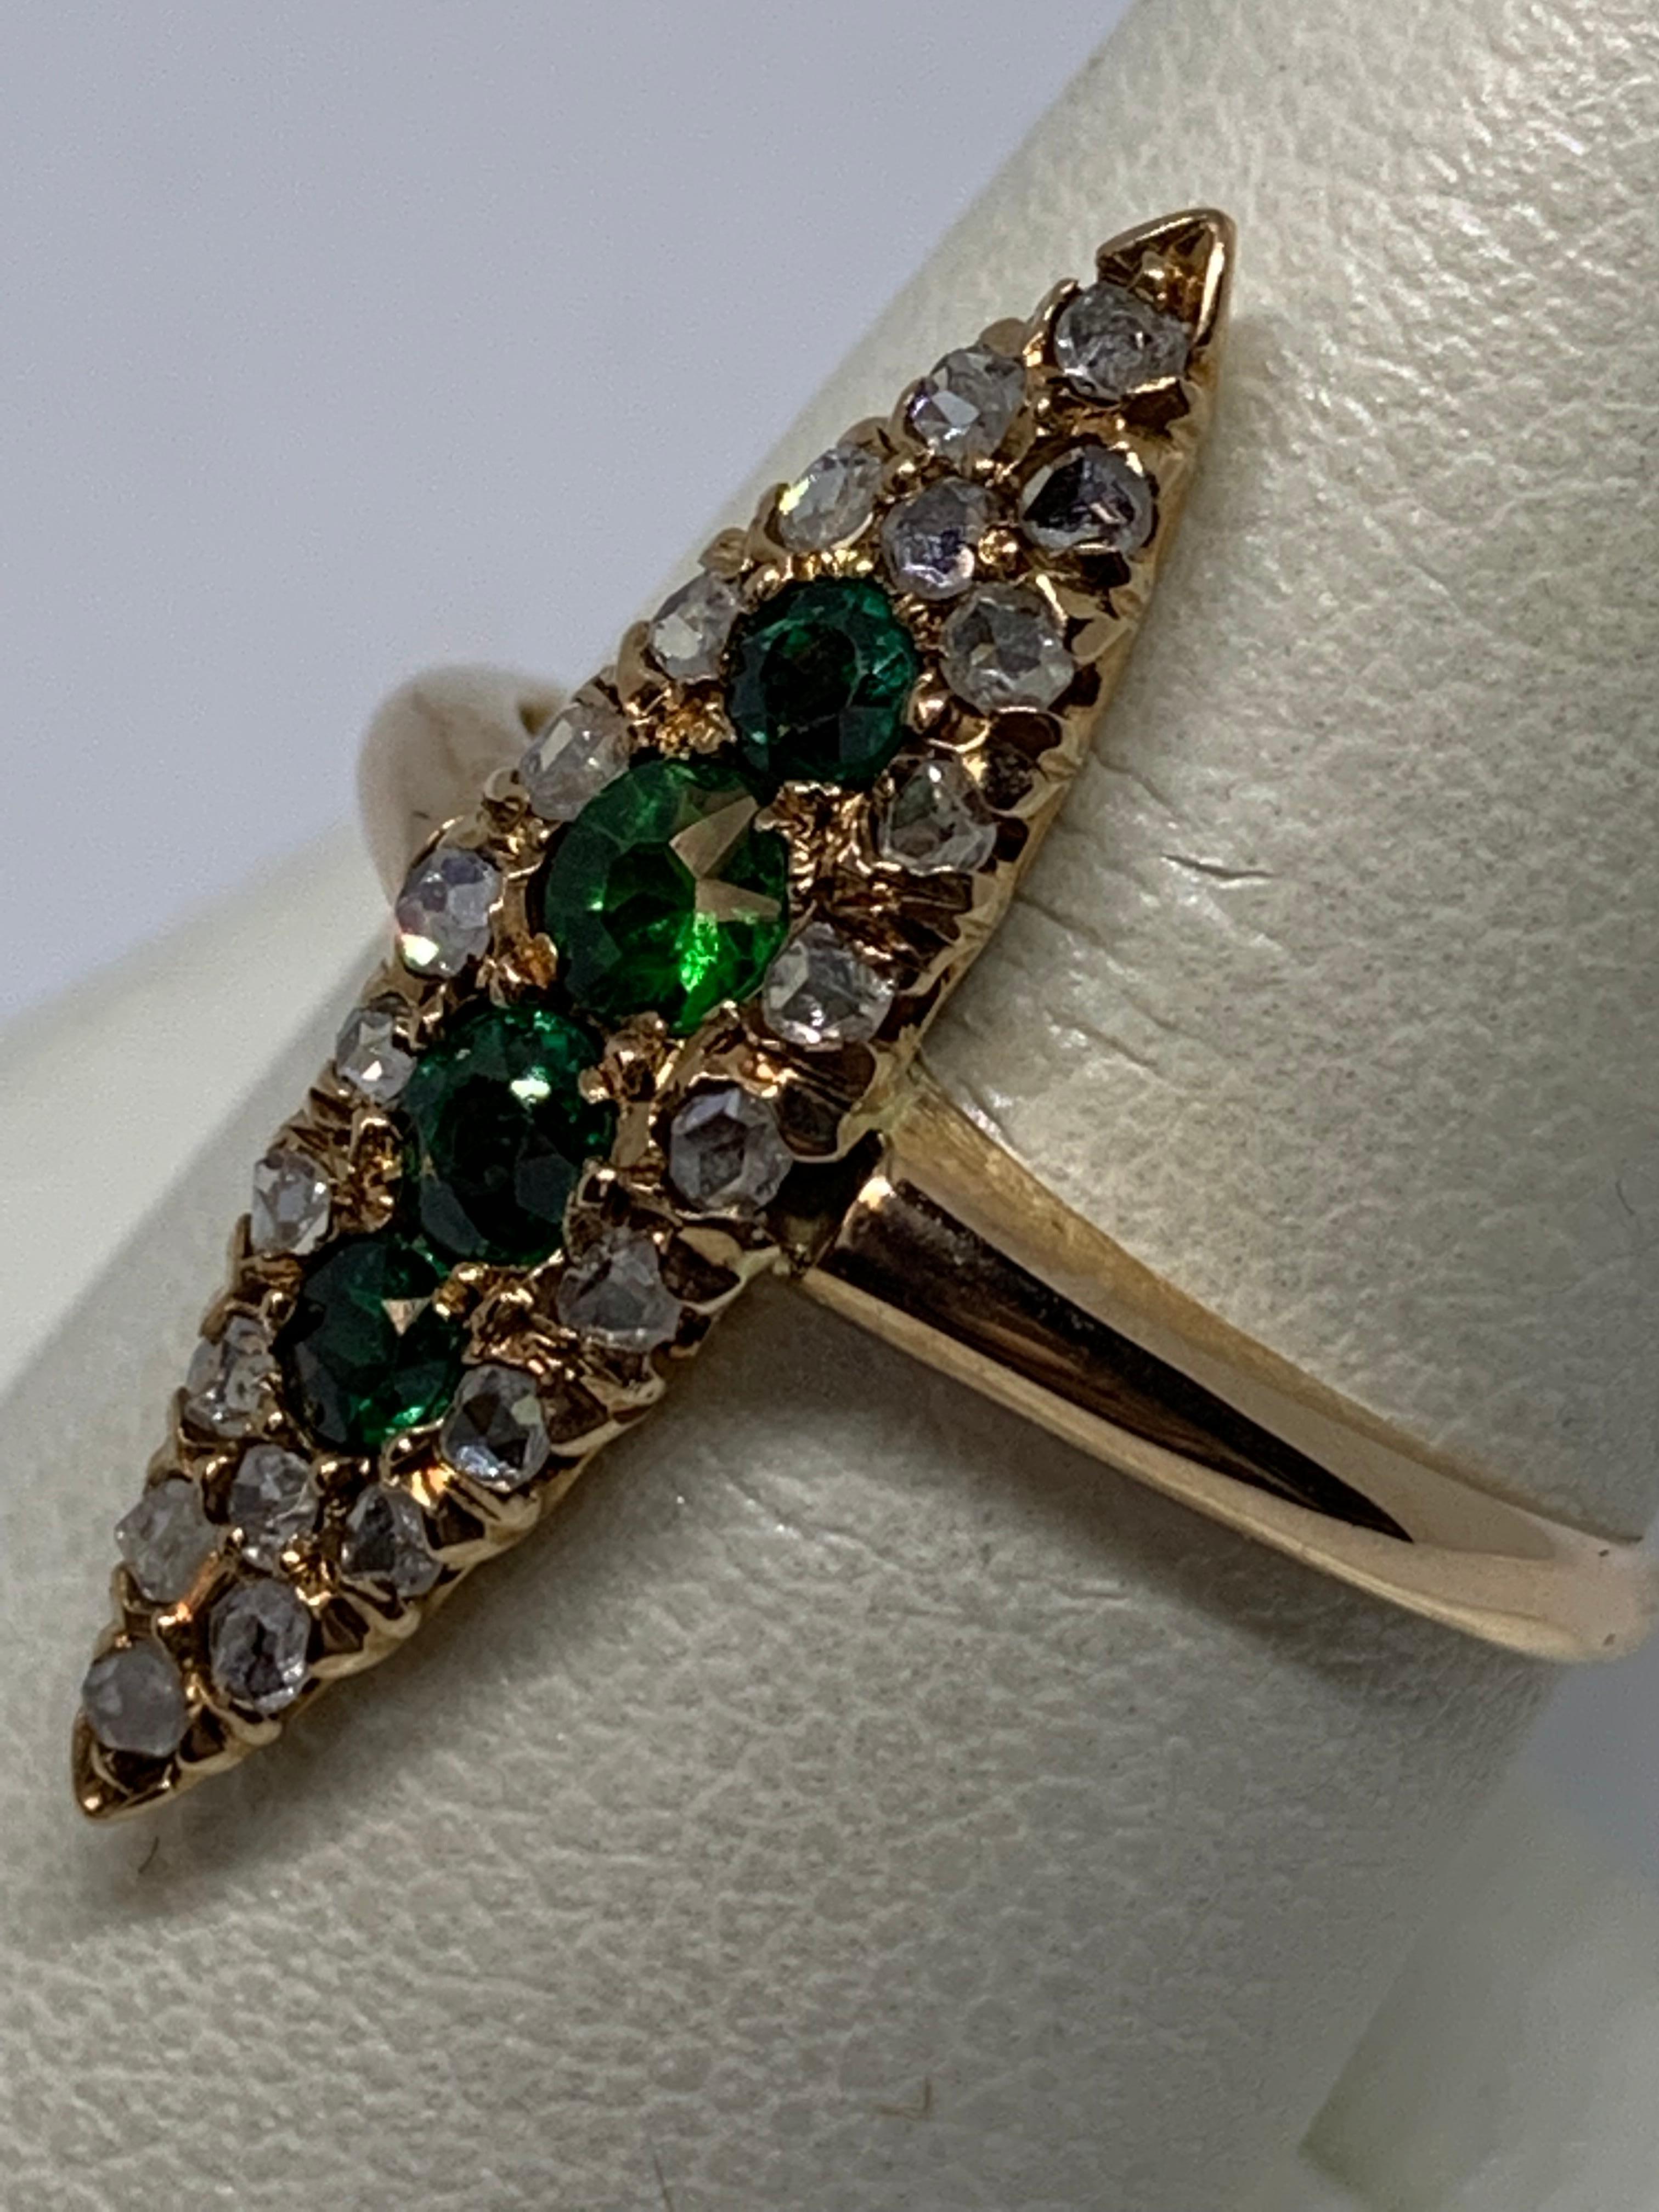 Beautiful Victorian fashion ring in 14kt rose gold with 4 - 2.60-3.00mm round green glass and garnet doublets and 22 - randomly faceted diamonds = .30ct total weight, 1.7 dwt.